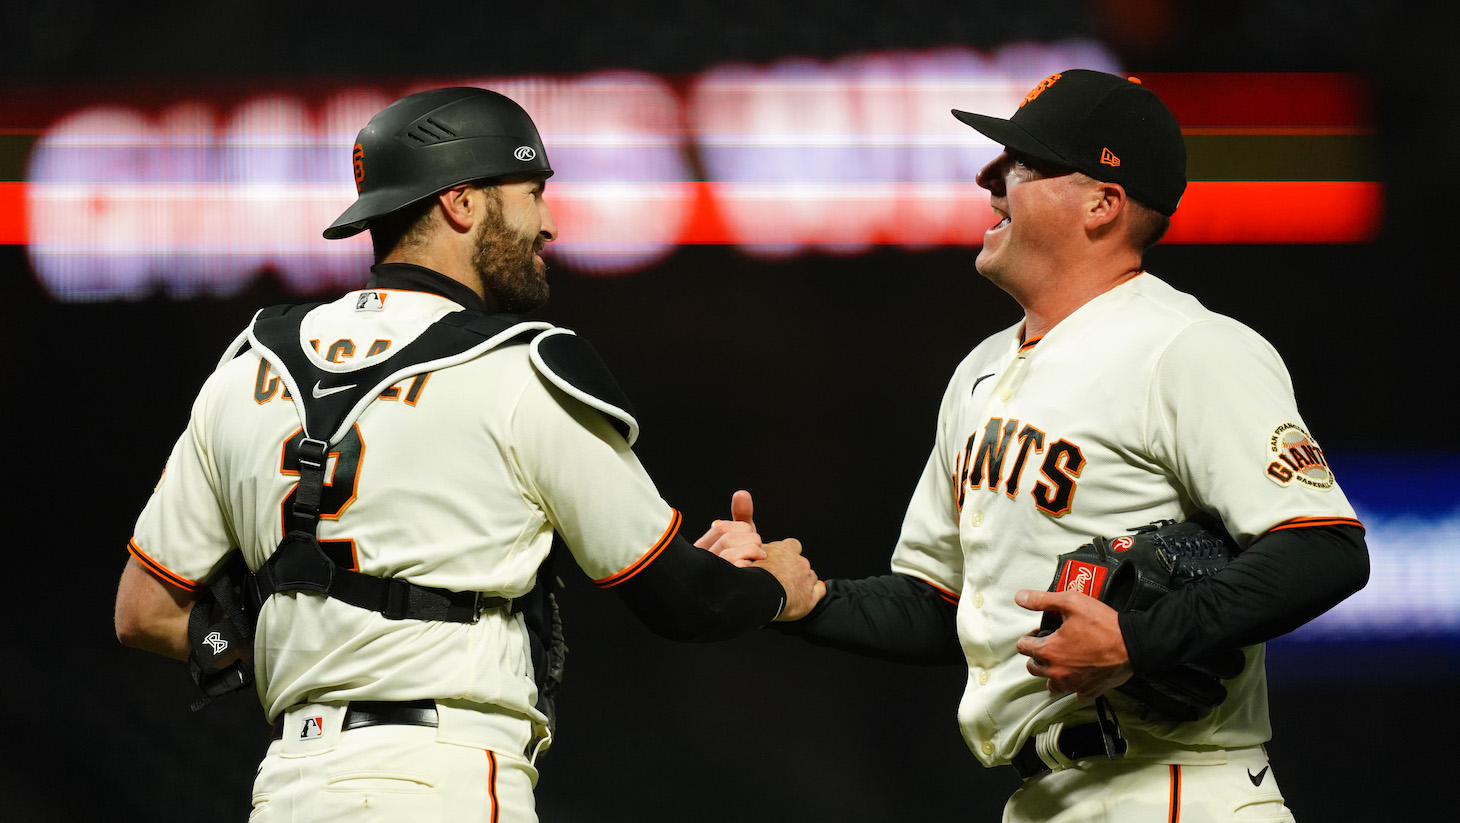 SAN FRANCISCO, CALIFORNIA - APRIL 22: Jake McGee #17 and Curt Casali #2 of the San Francisco Giants celebrate beating the Miami Marlins at Oracle Park on April 22, 2021 in San Francisco, California. (Photo by Daniel Shirey/Getty Images)